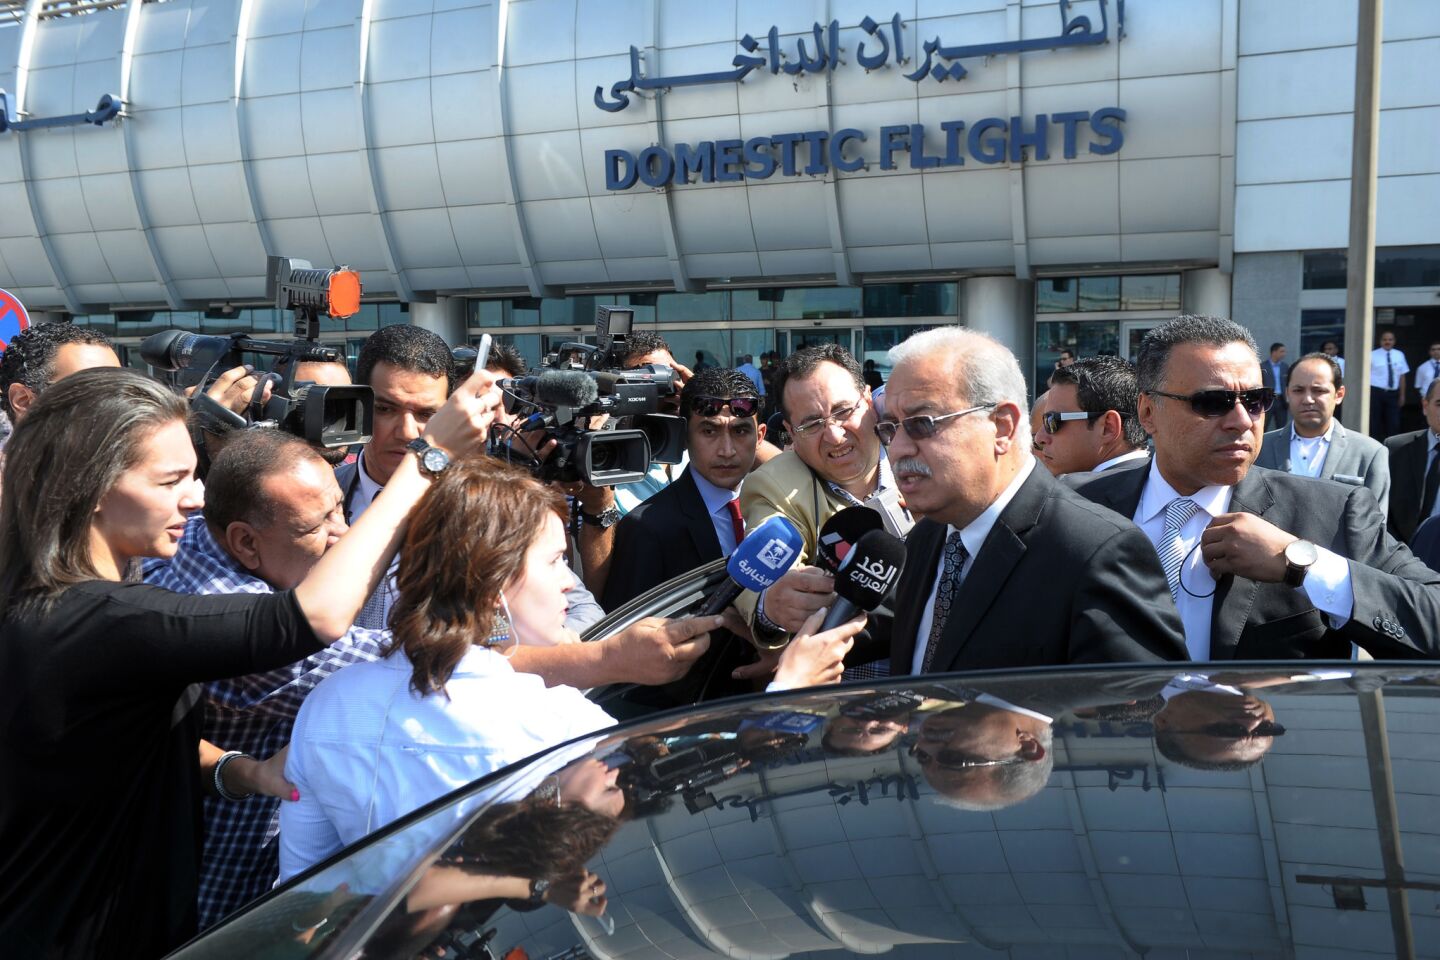 Egyptian Prime Minister Sherif Ismail talks to reporters at Cairo International Airport after the crash.